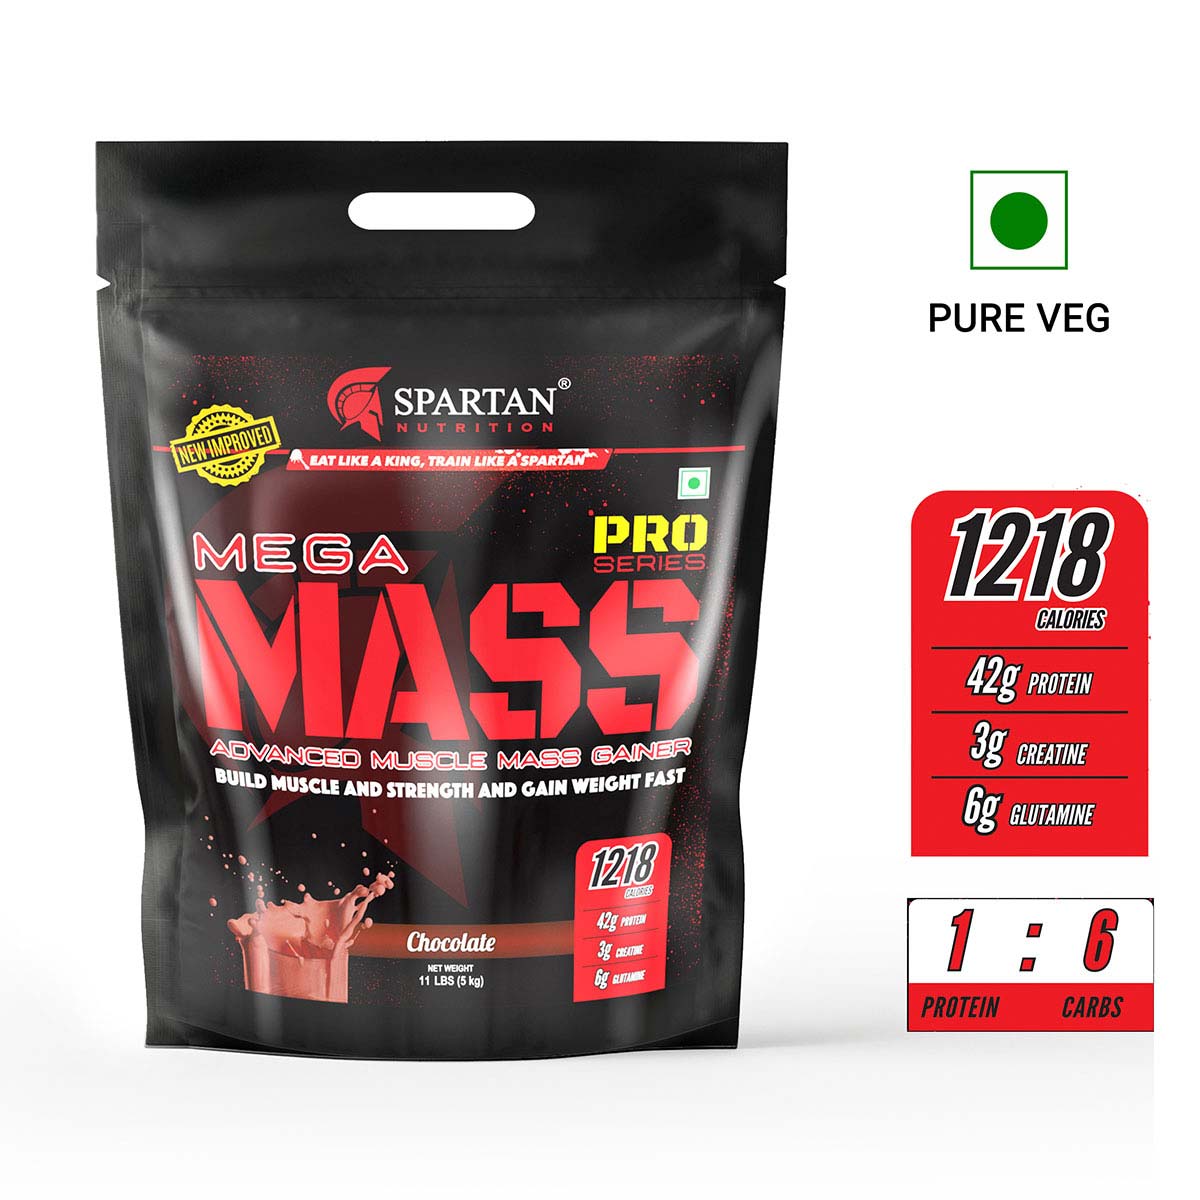 Spartan Nutrition Mega Mass Pro High Protein and High Calorie Mass Gainer / Weight Gainer Powder - with Vitamins and Minerals.